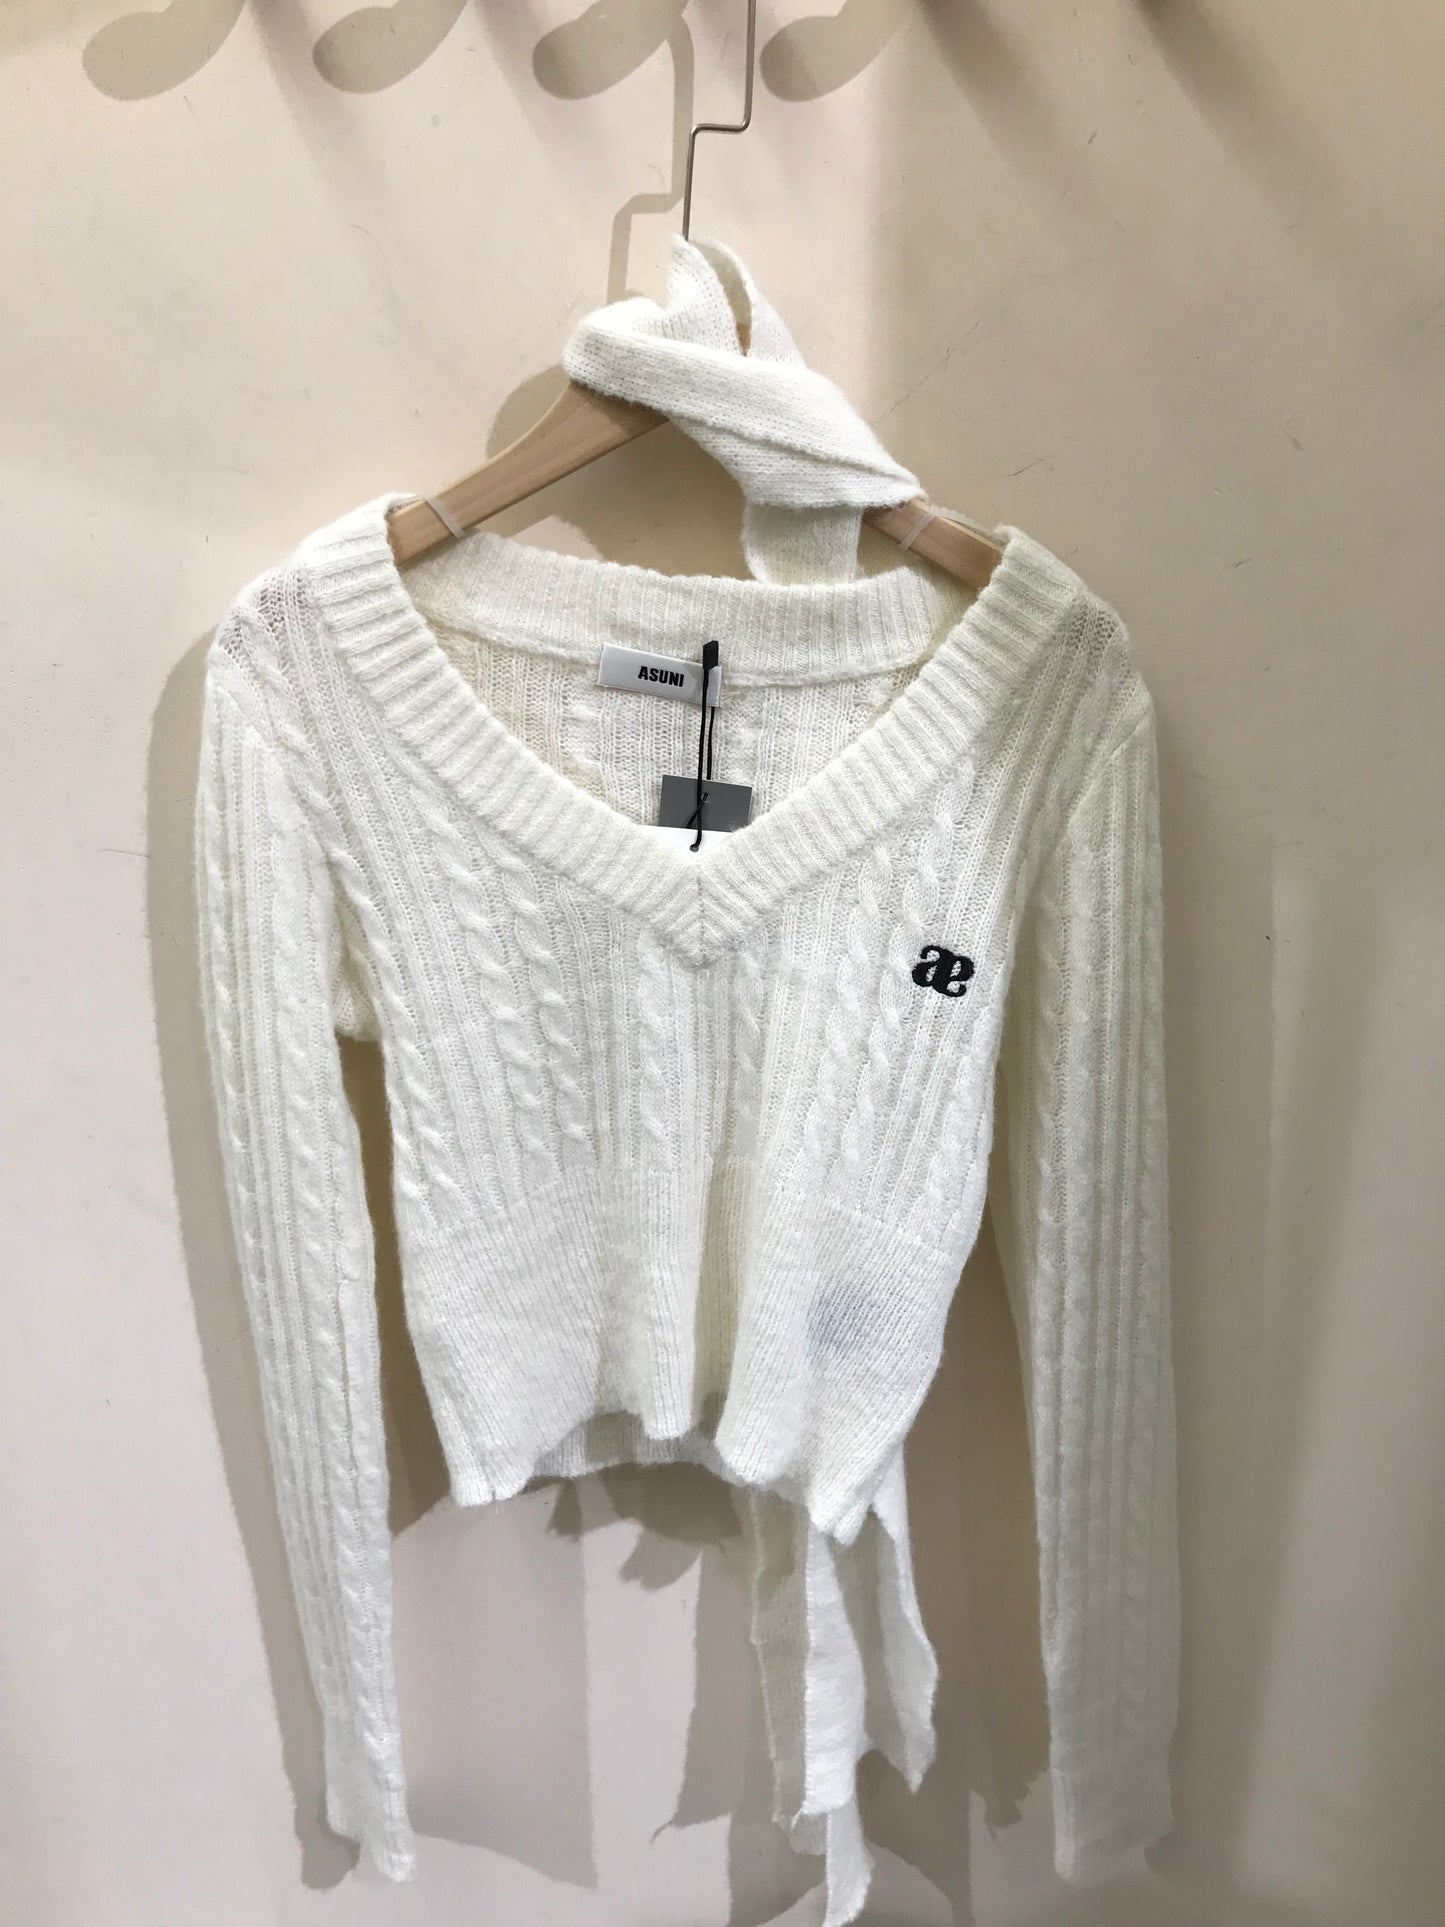 Double A logo V-neck knitted cold sweater in white